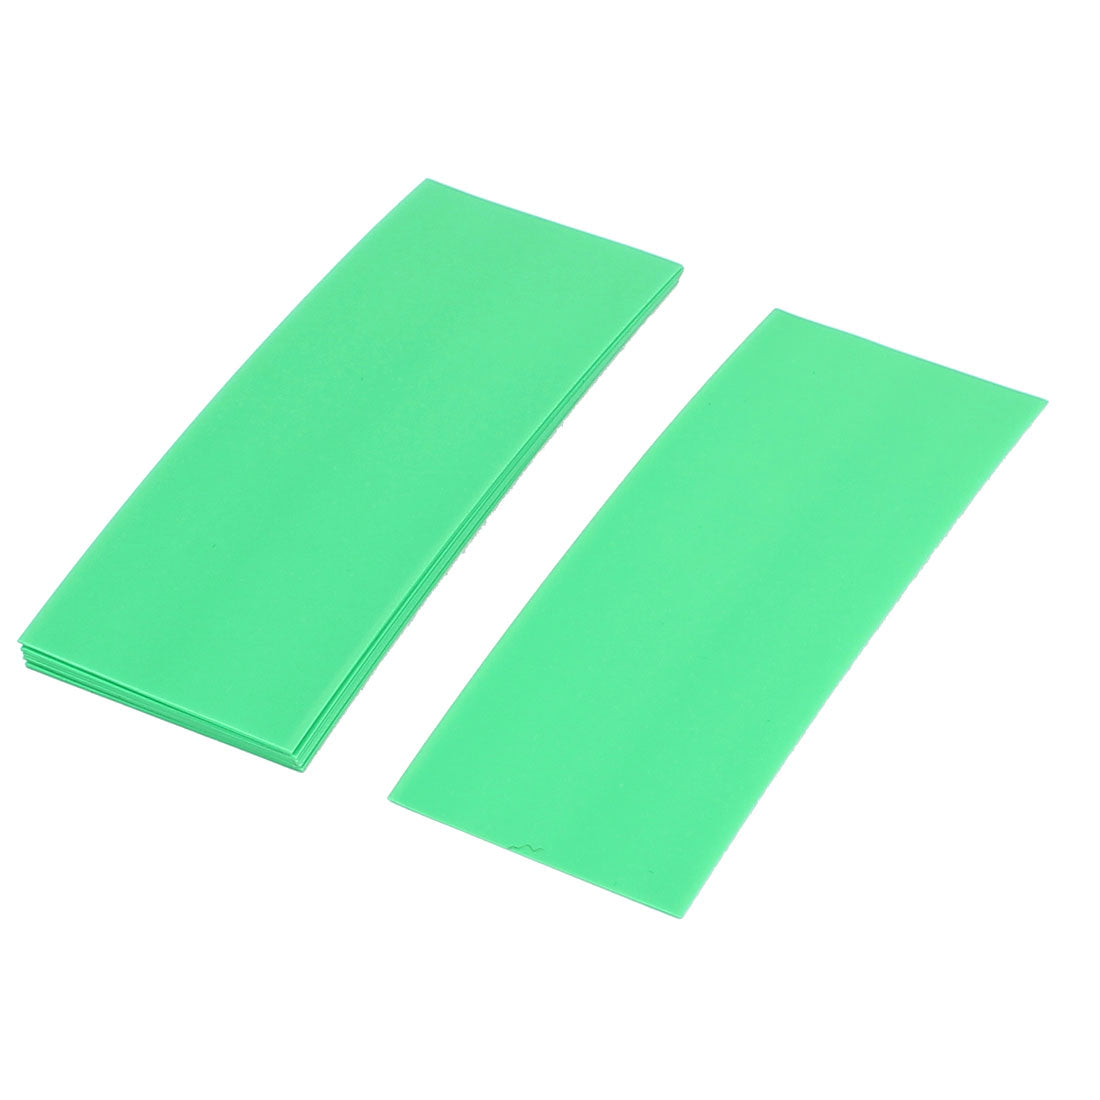 uxcell Uxcell 10pcs 72mm x 18.5mm PVC Heat Shrink Tubing Green for 1 x 18650 Battery